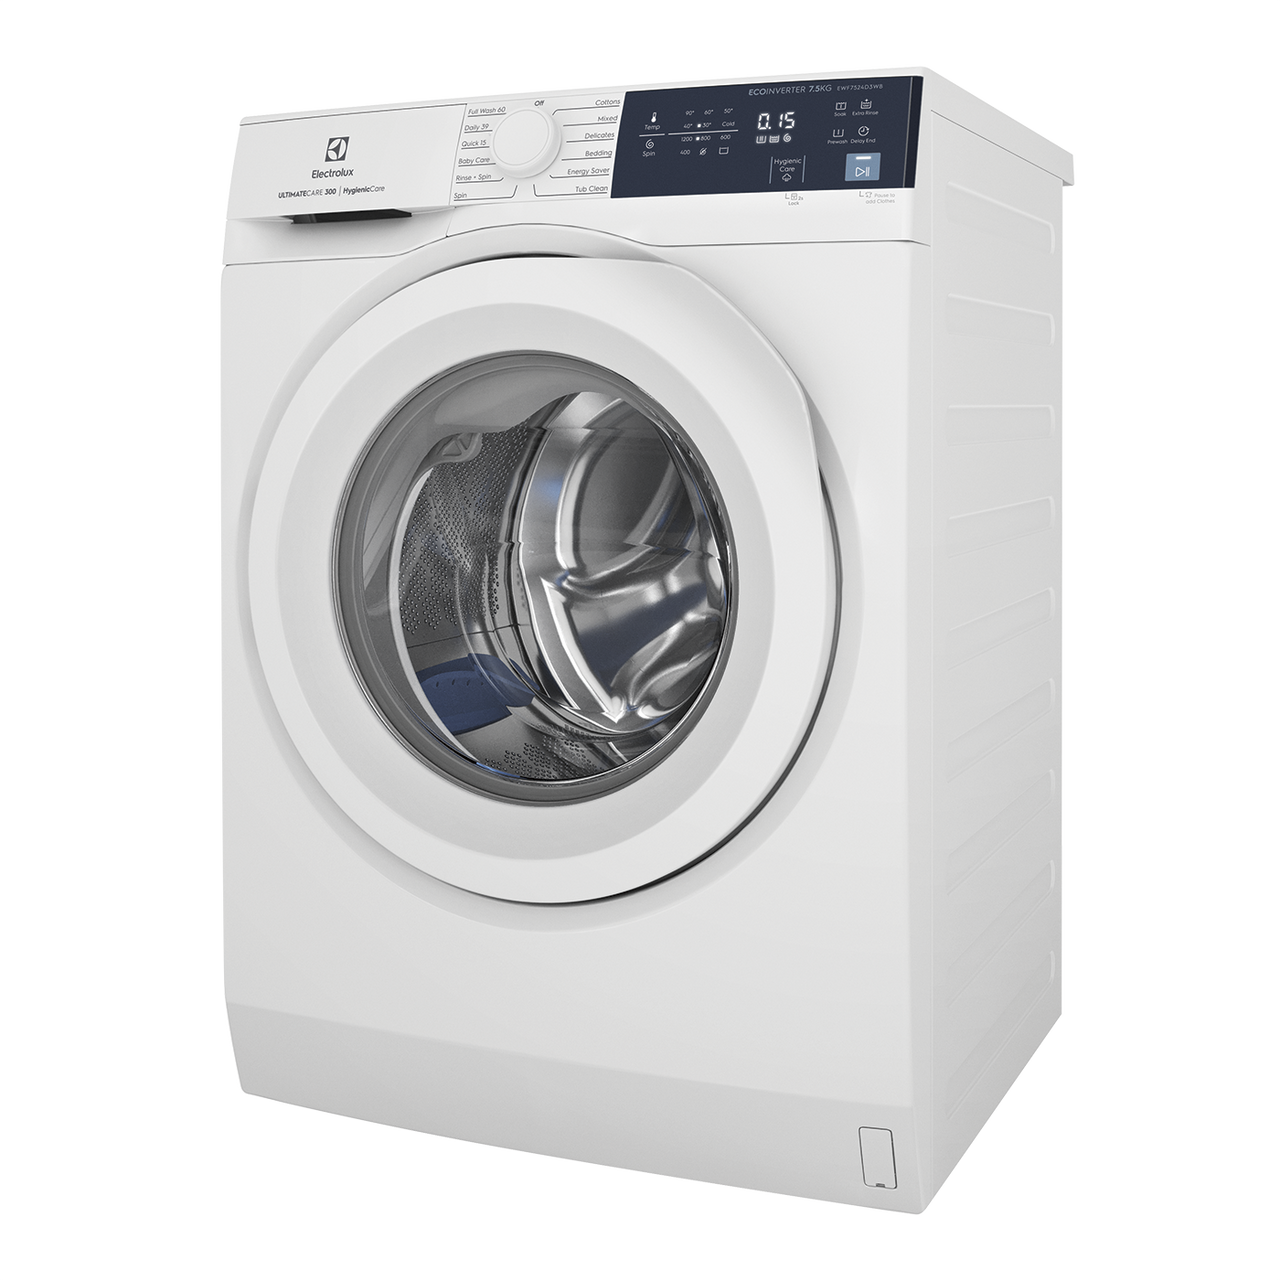 EWF7524D3WB - 7.5kg Front Load washer - White